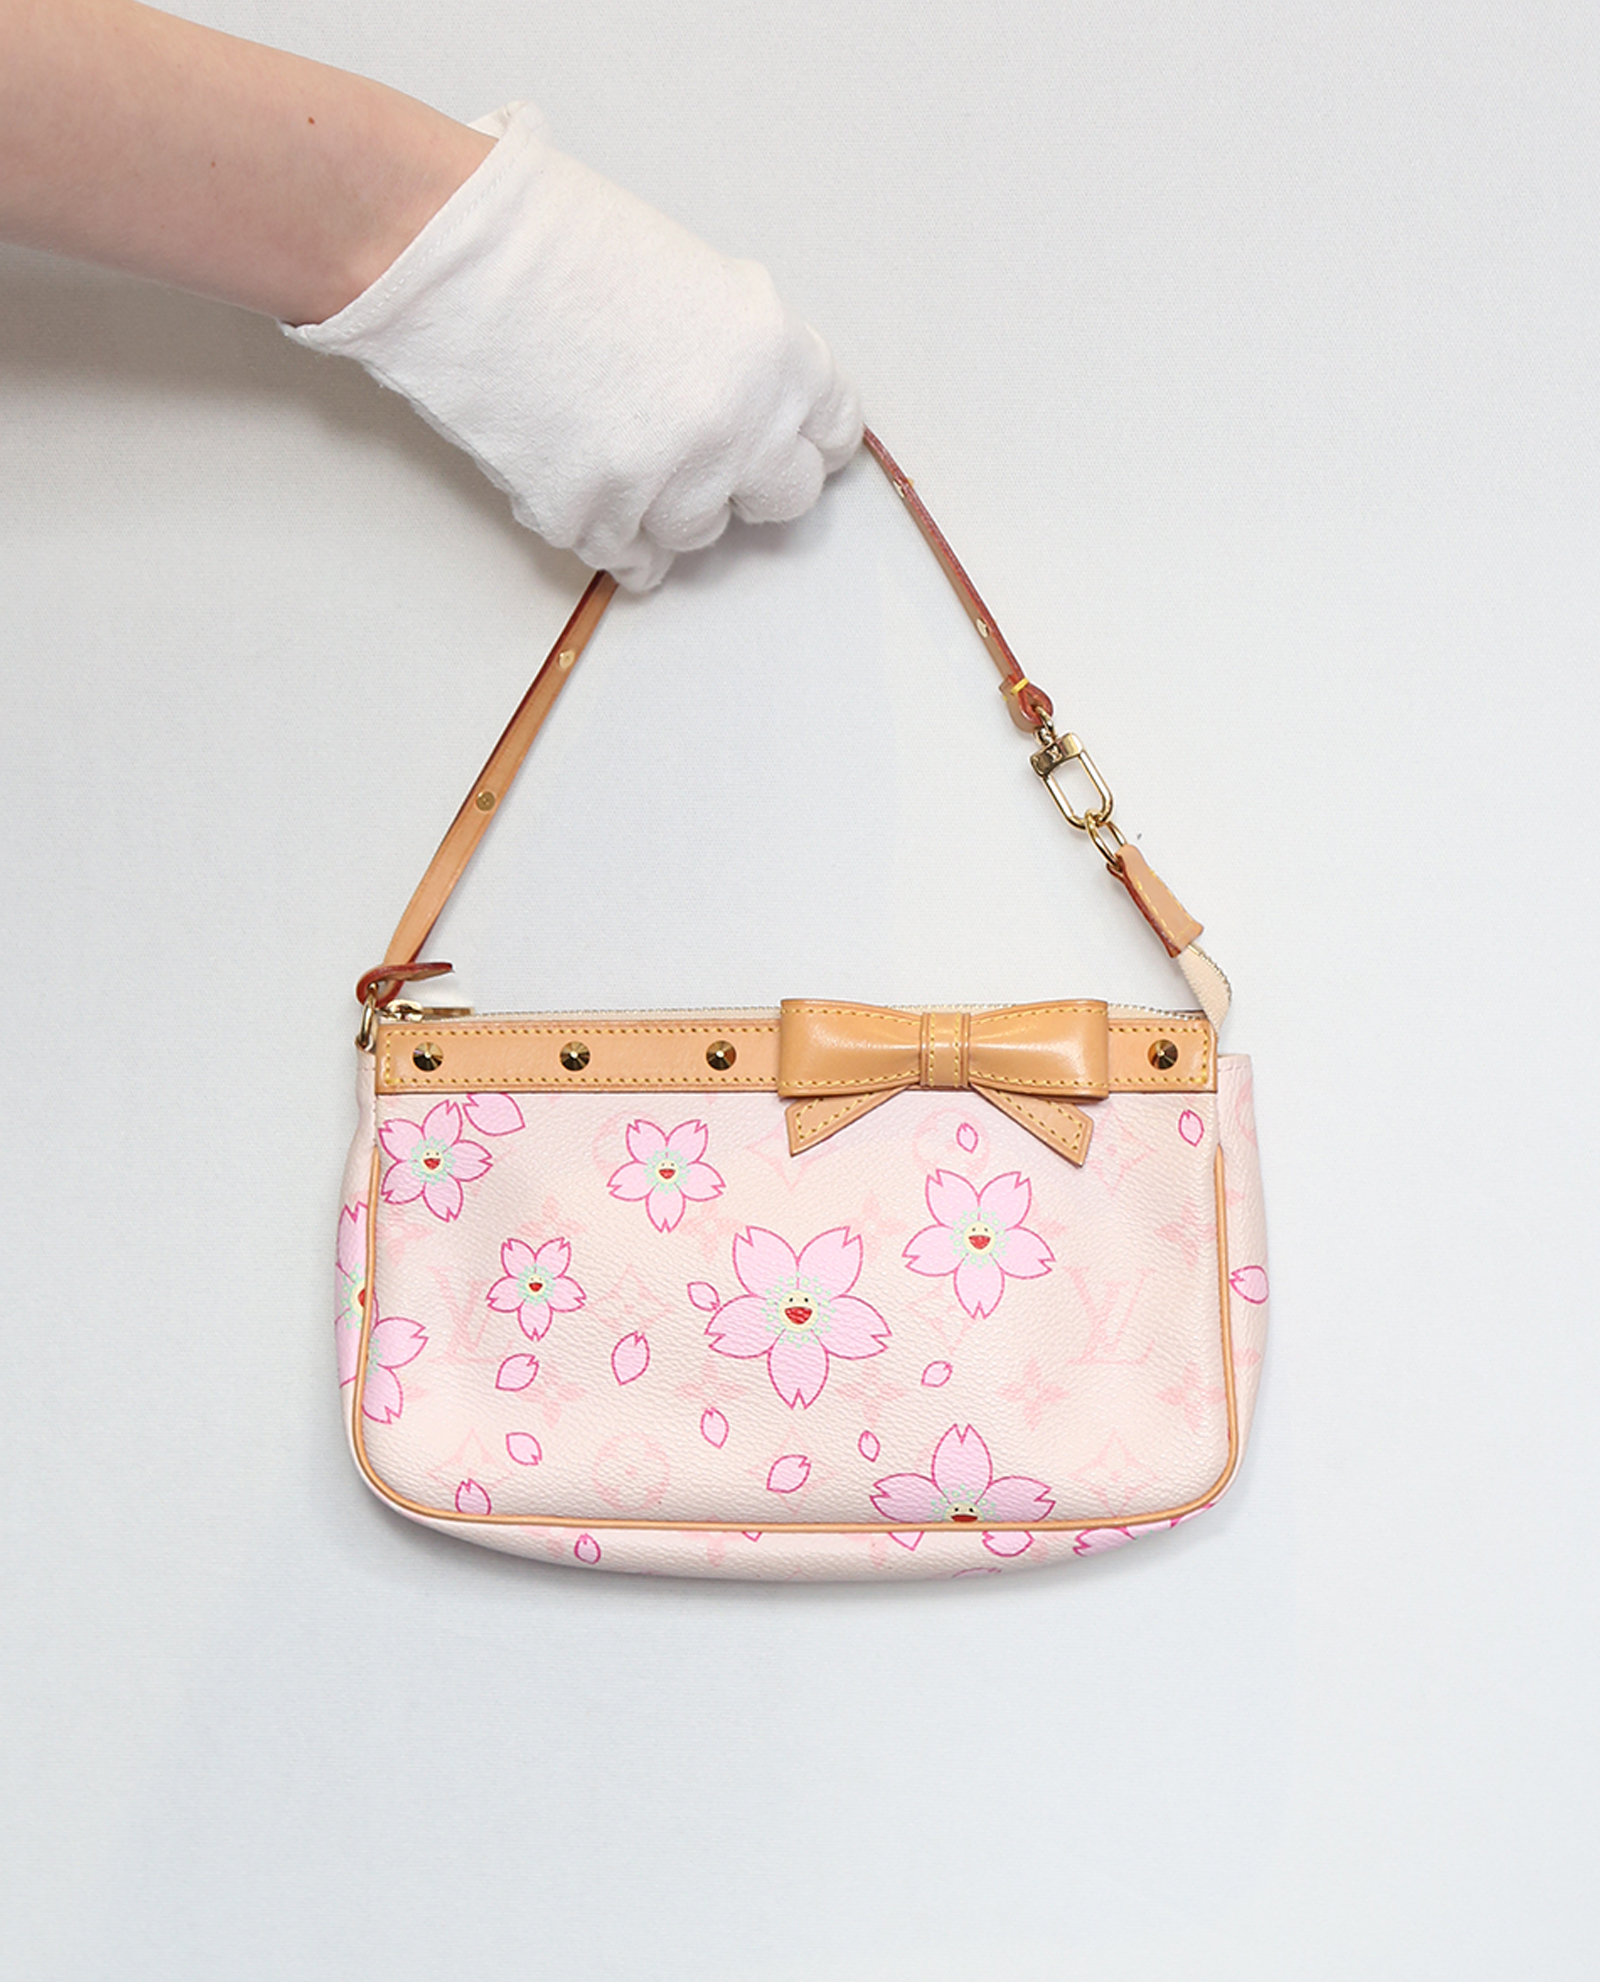 Exquisite Cherry Blossom Embroidery Decoration Pink and White Classic Lolita Square Textured Crossbody Bag